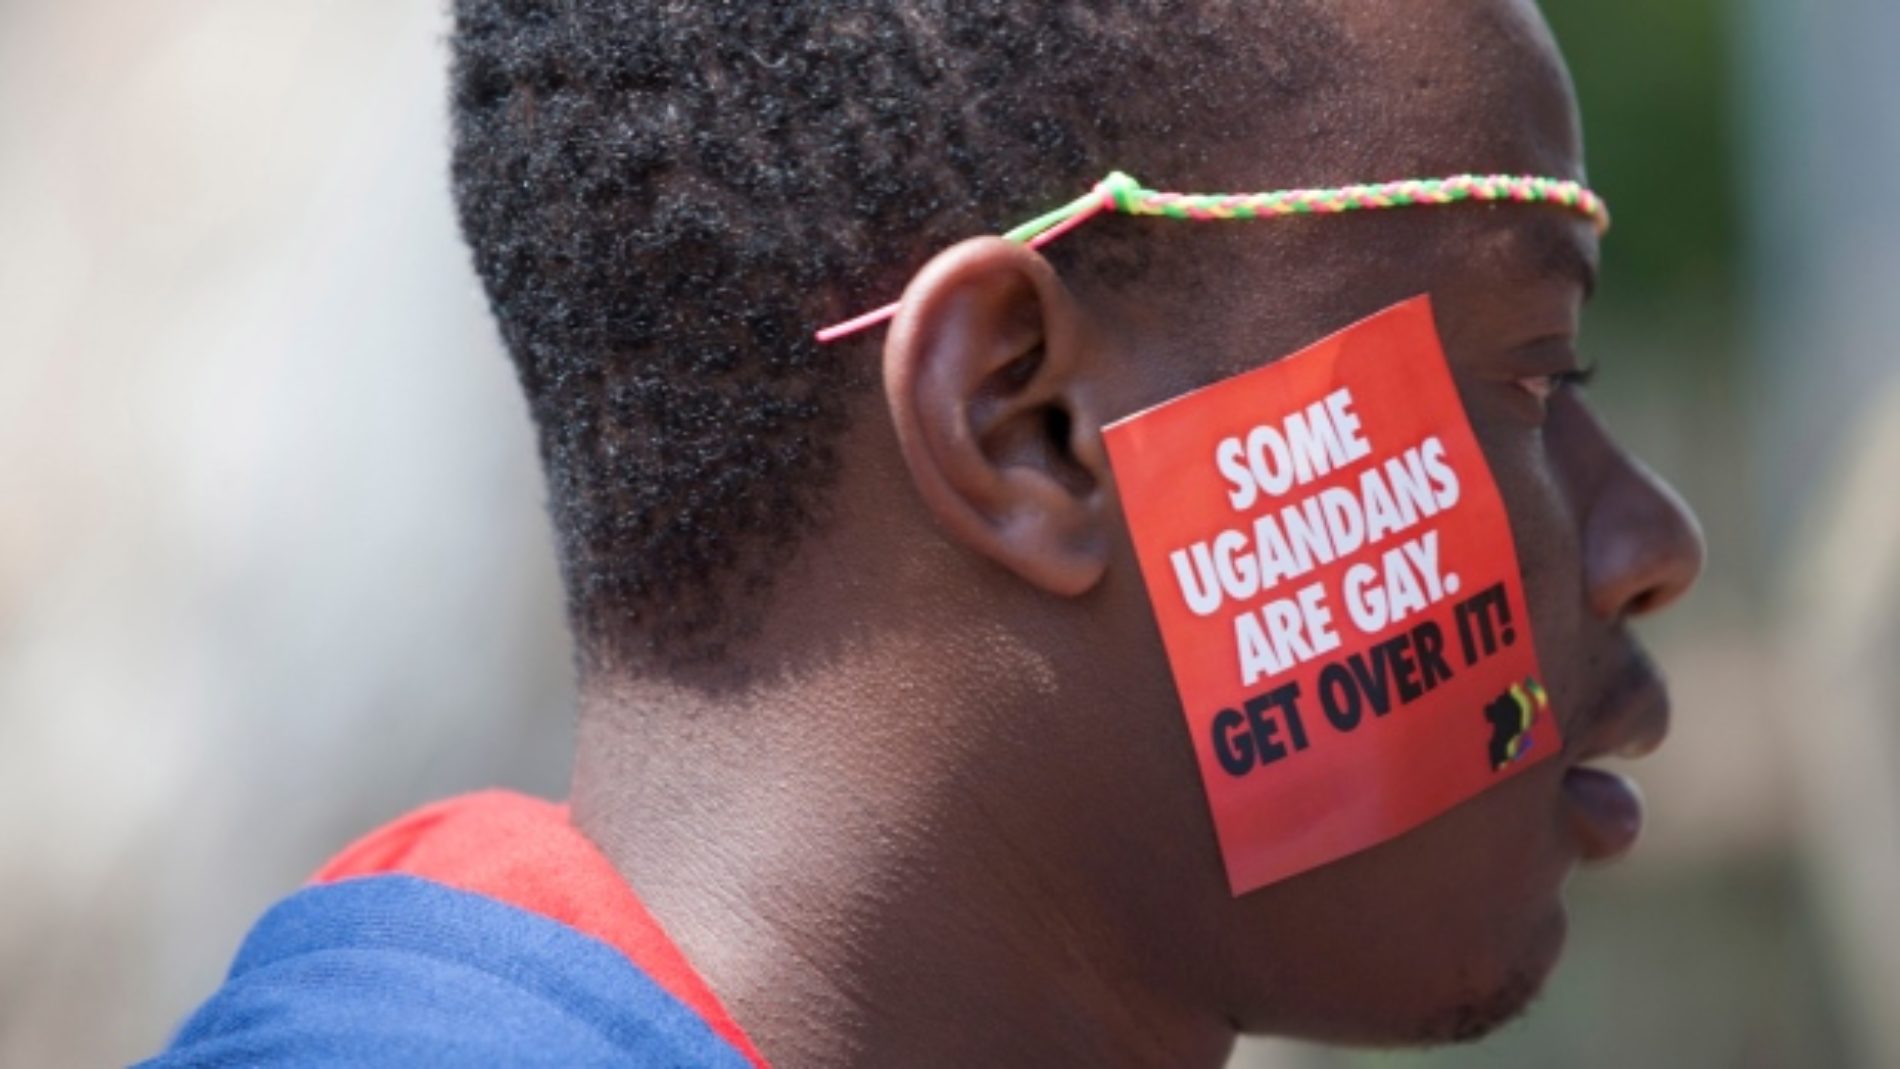 Uganda holds its first gay pride following overturn of anti-gay law